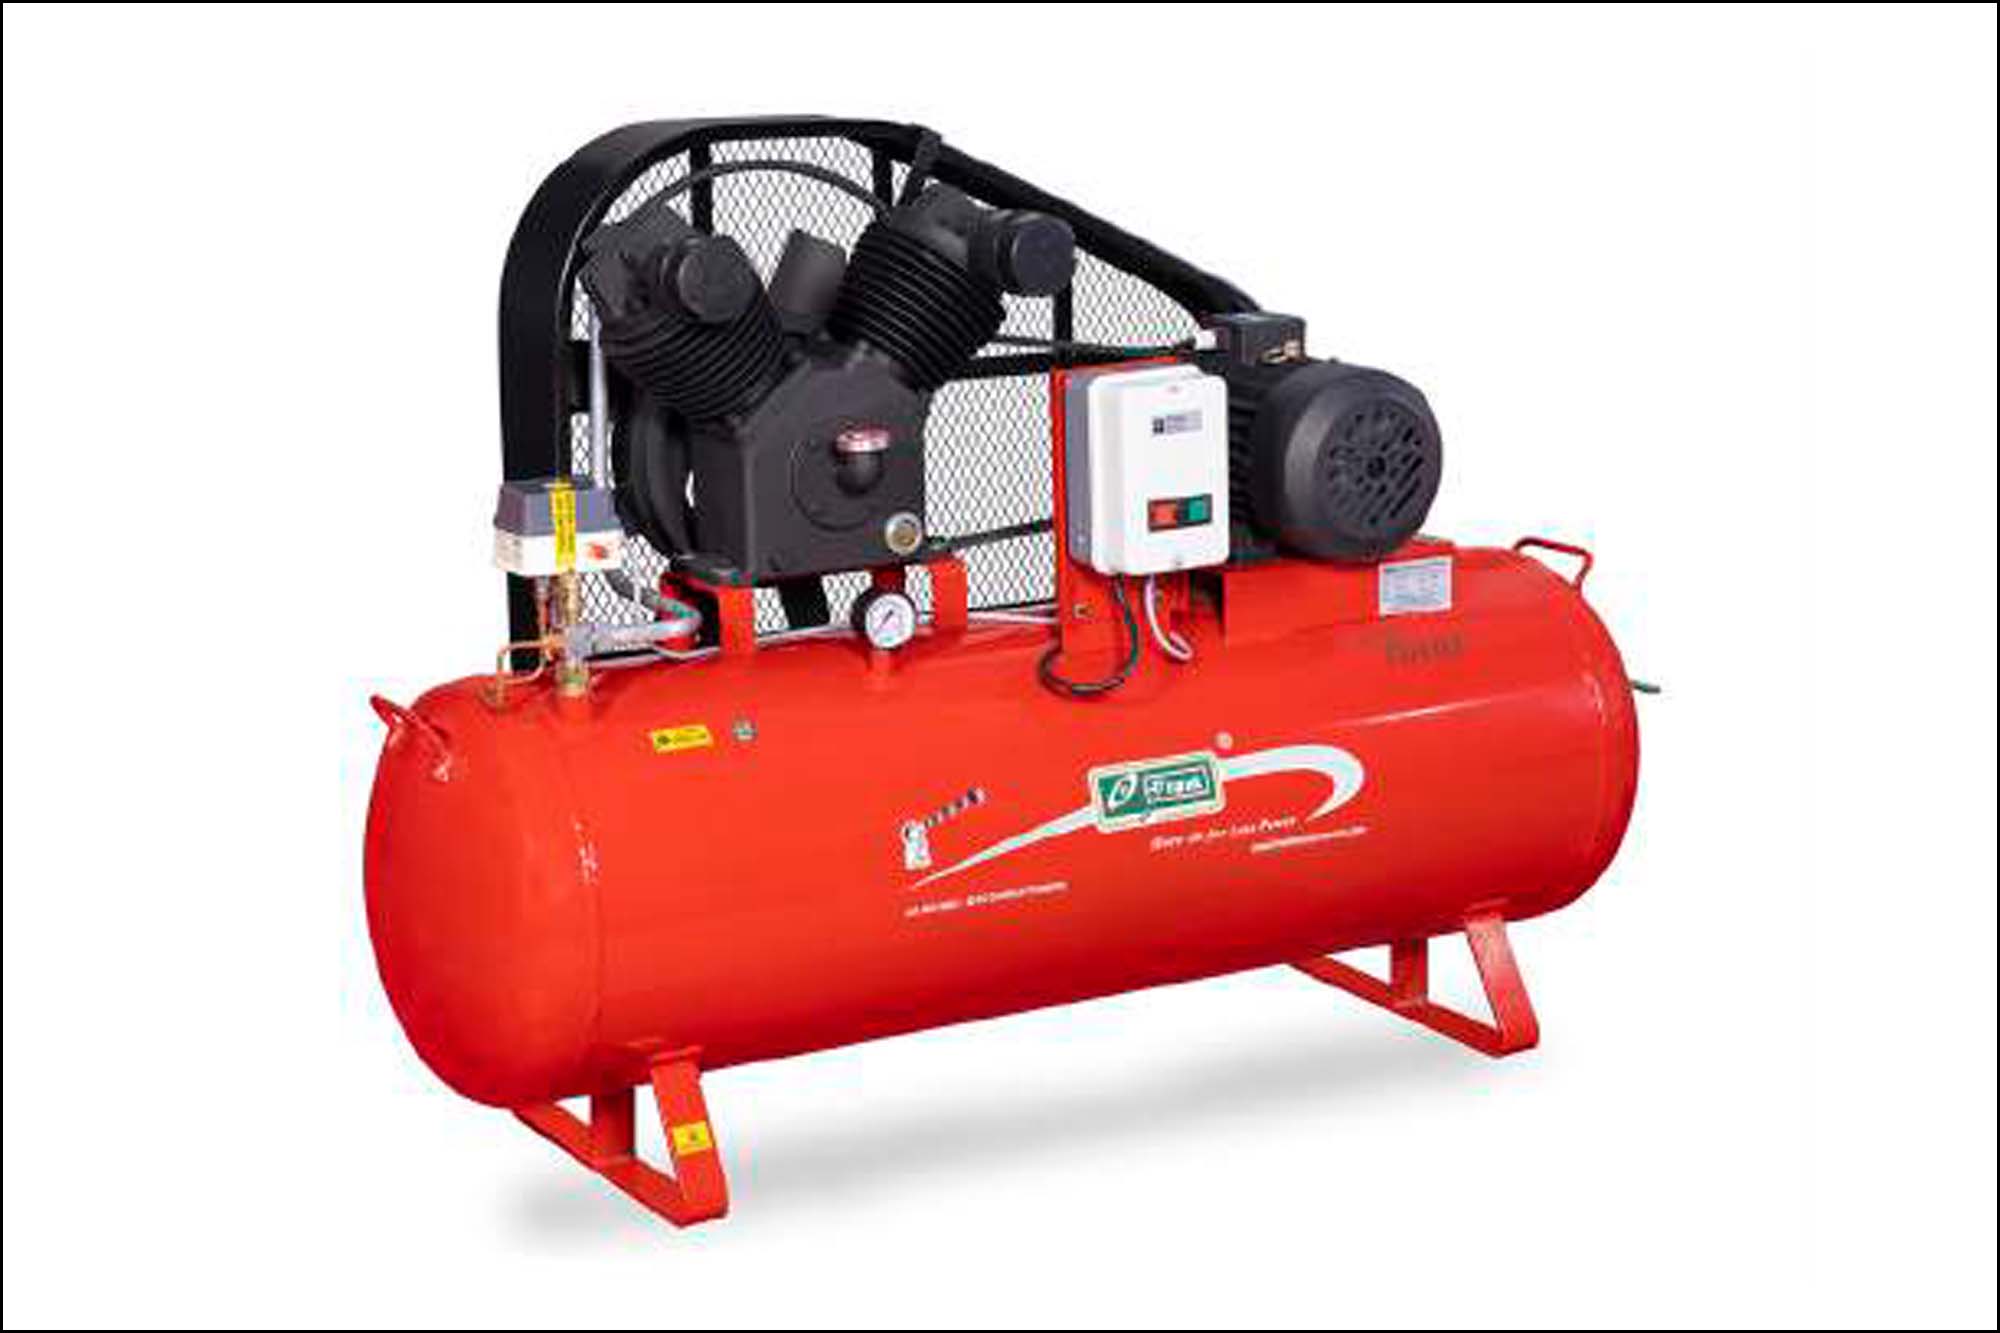 Heavy-duty reciprocating air compressor for optimal performance and durability